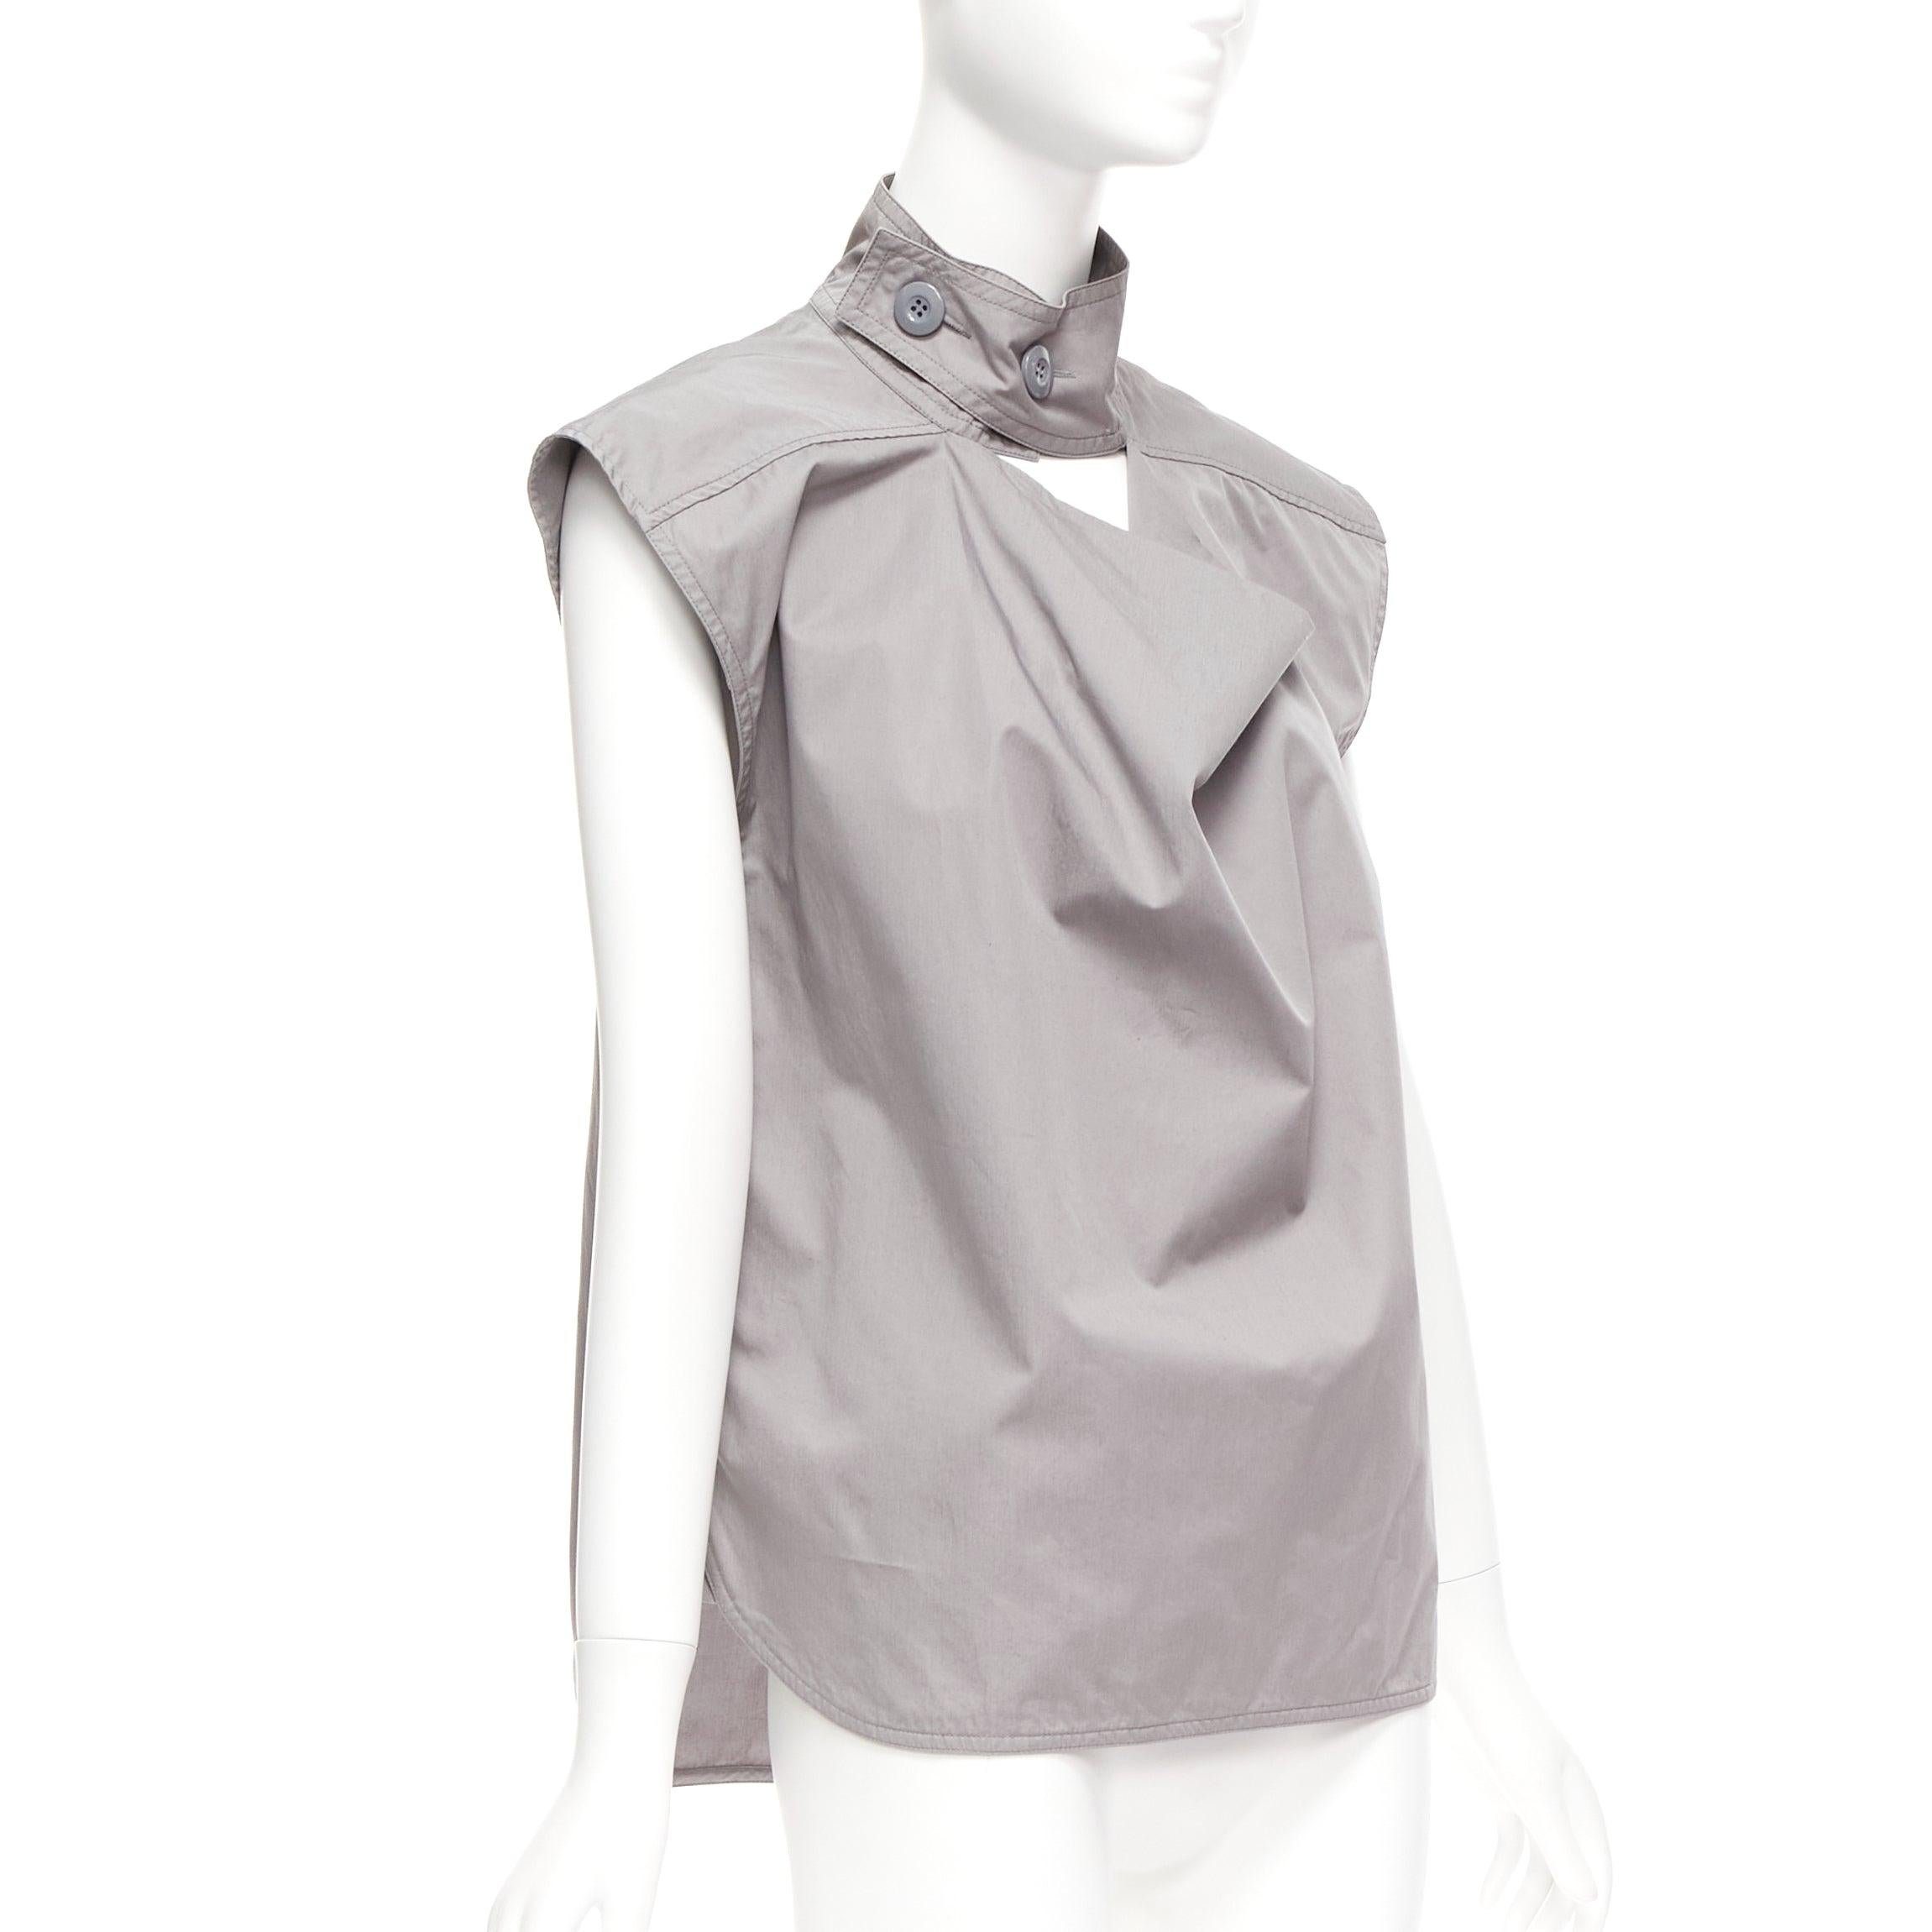 MARNI grey cotton drape cut out collar utility collar boxy top IT36 XS
Reference: CELG/A00326
Brand: Marni
Material: Cotton
Color: Grey
Pattern: Solid
Closure: Button
Extra Details: Button belted collar.
Made in: Italy

CONDITION:
Condition: Very